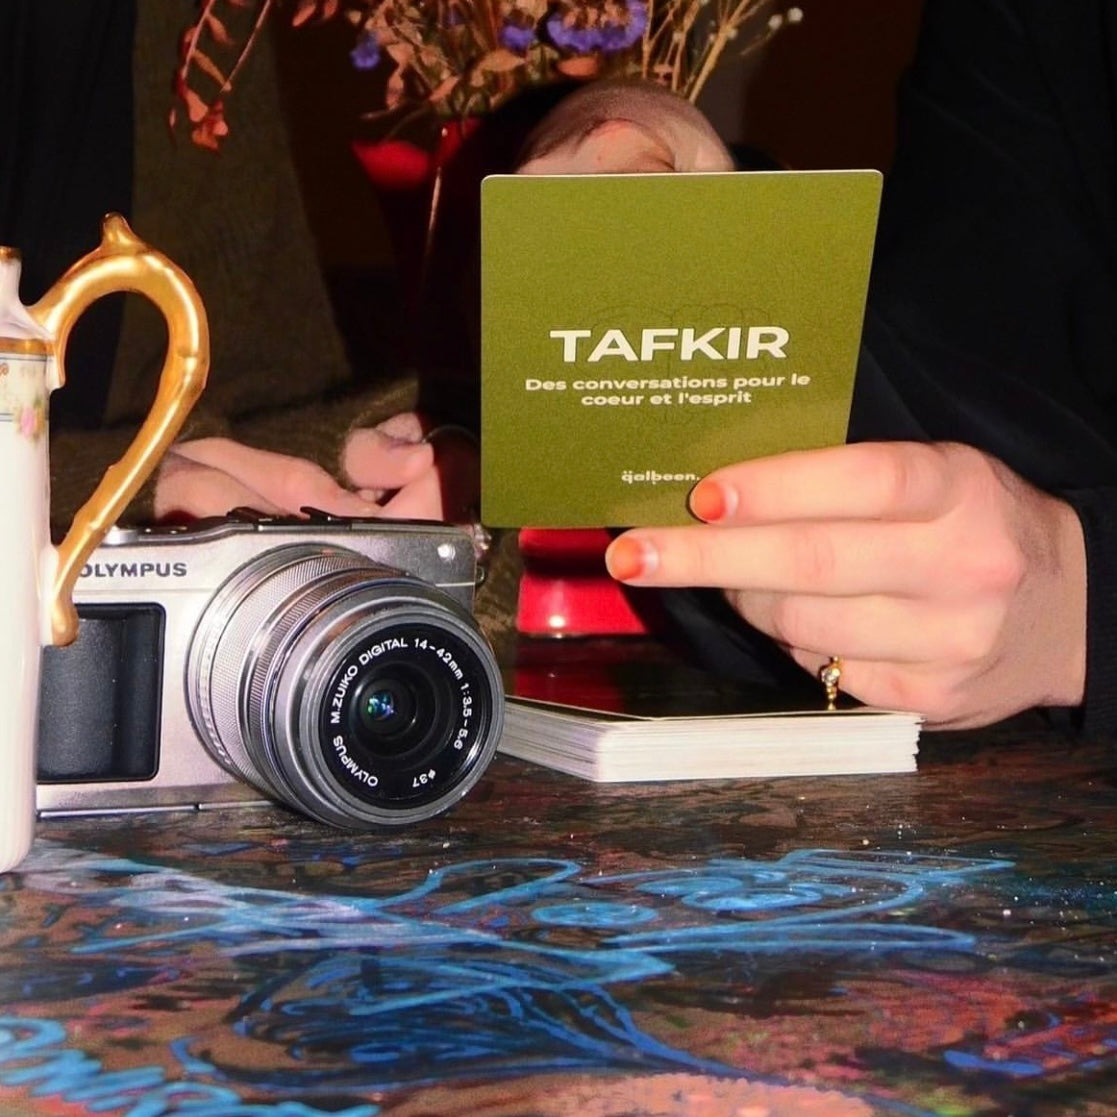 Tafkir cards: Brighten up your discussions